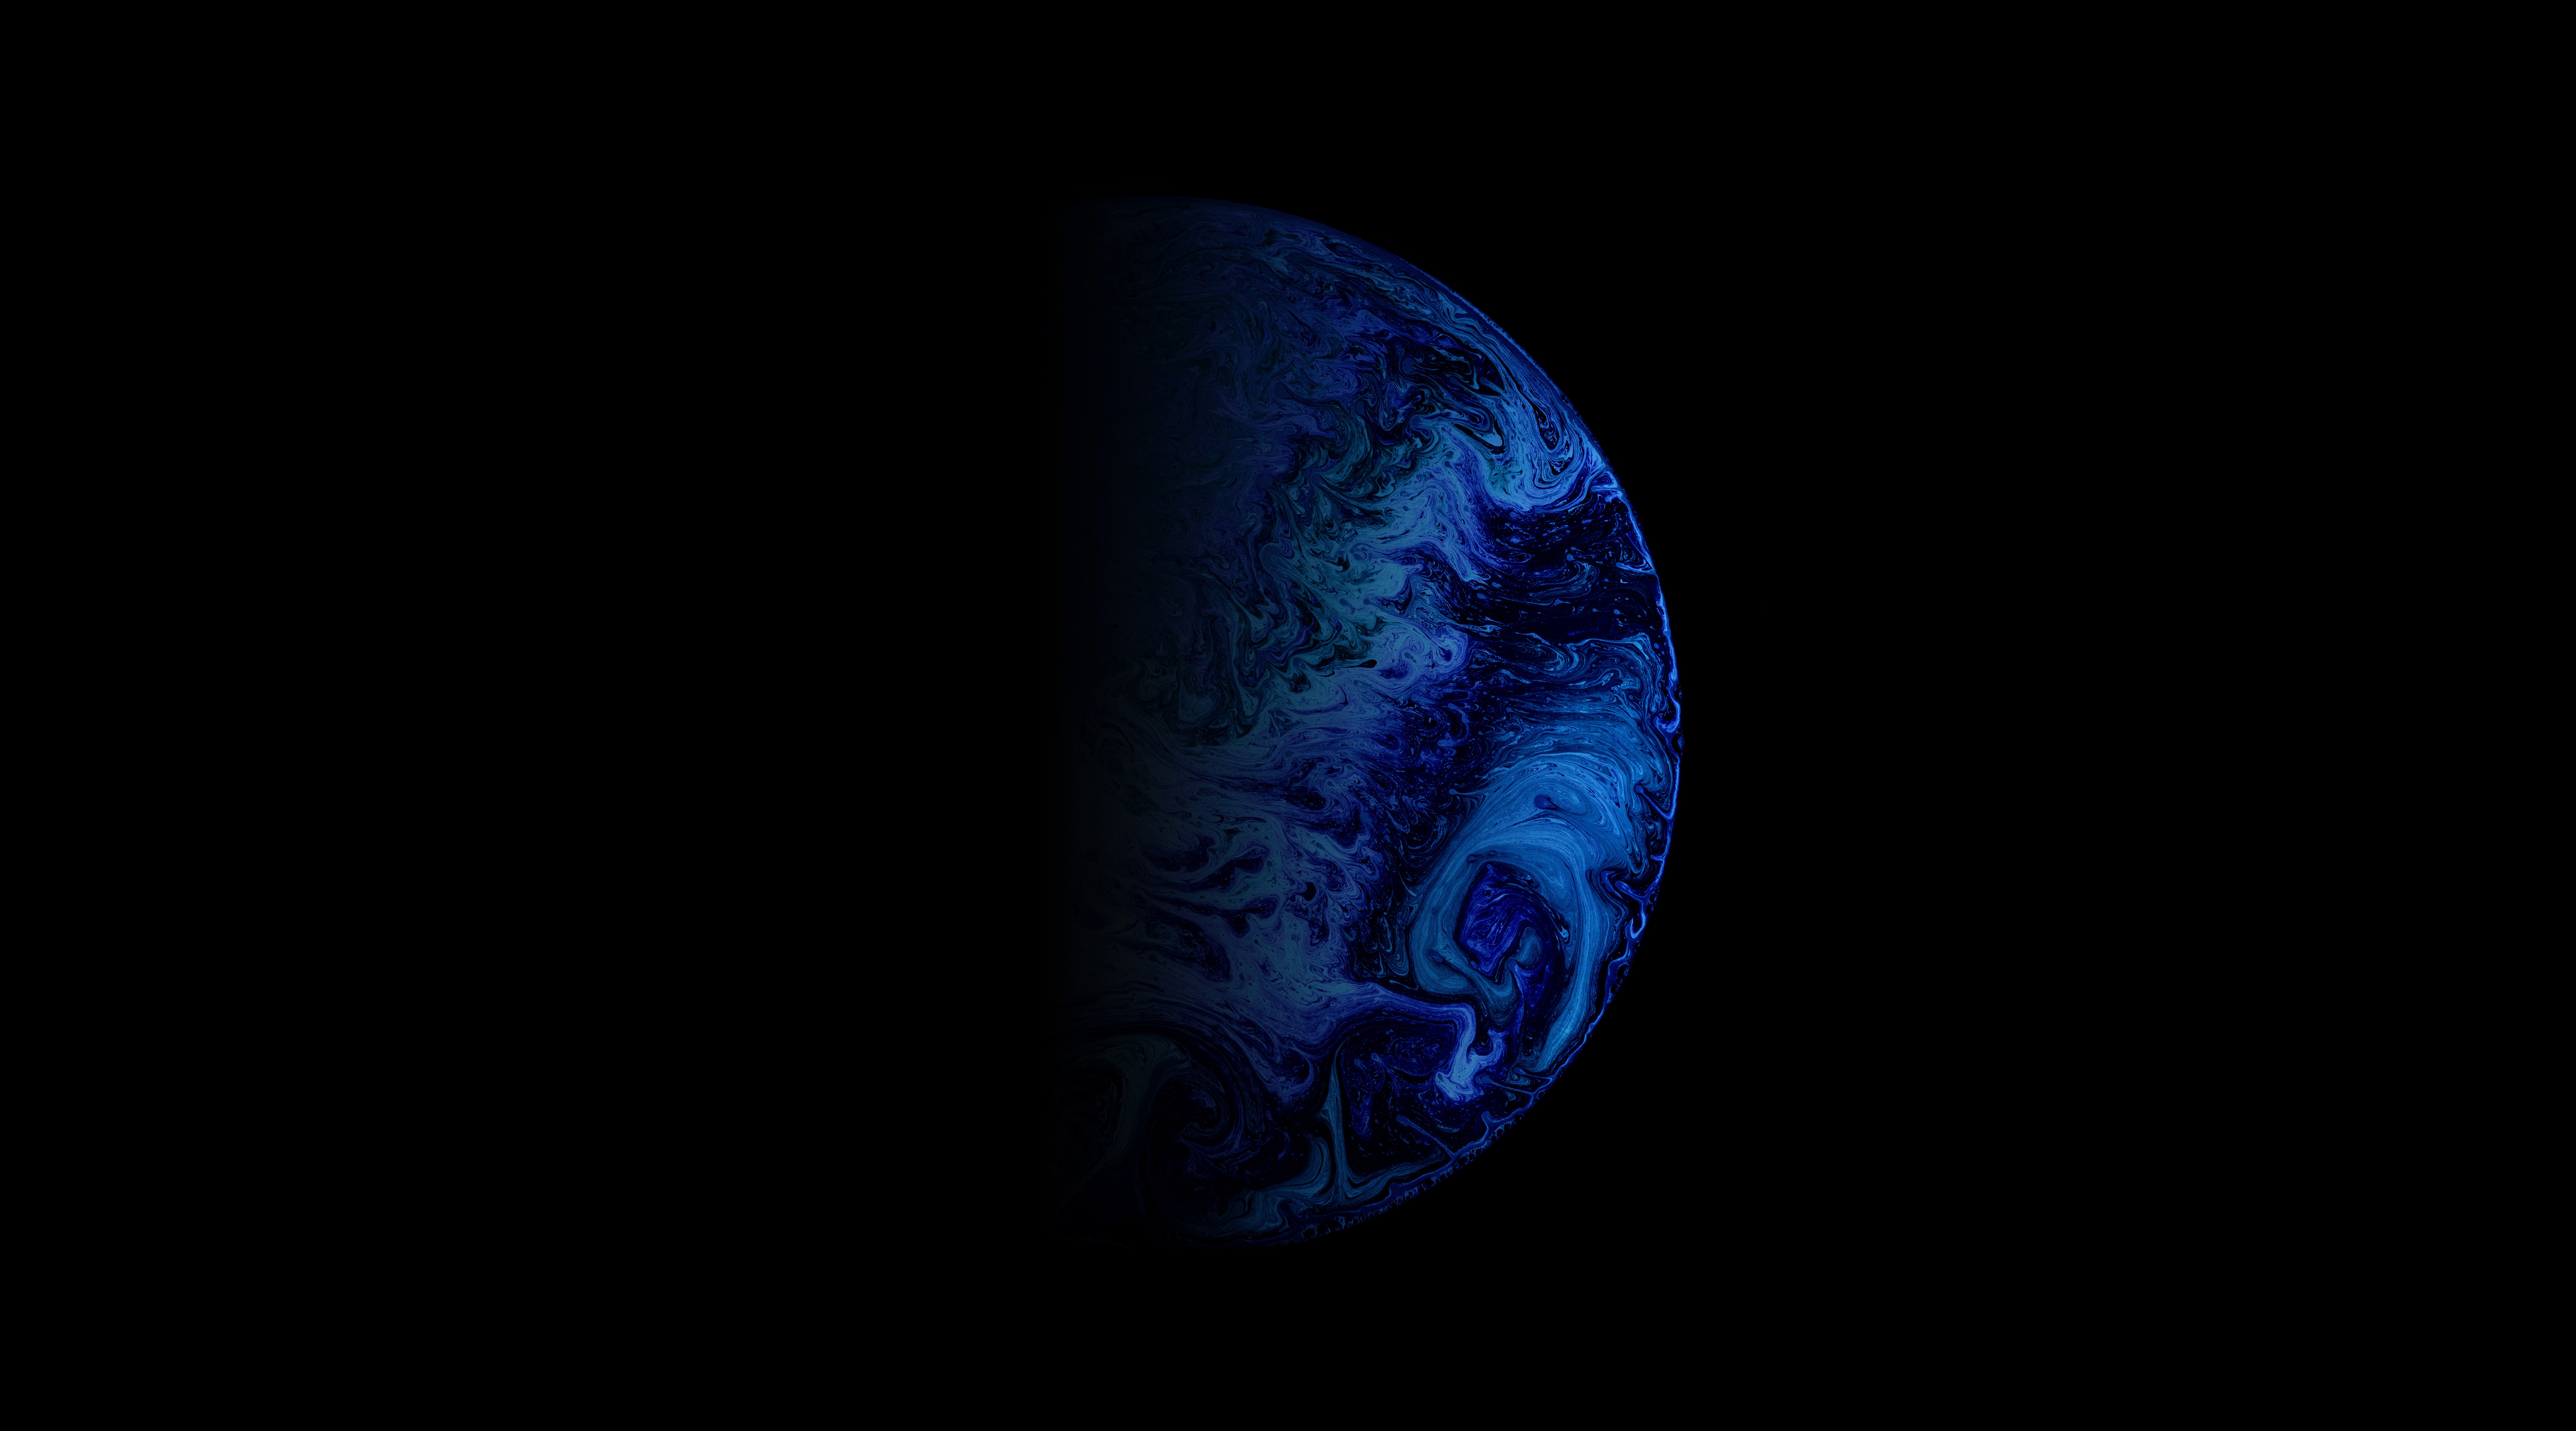 HD wallpaper, Amoled, 5K, Planet, Outer Space, Blue, Black Background, Astronomy, 8K